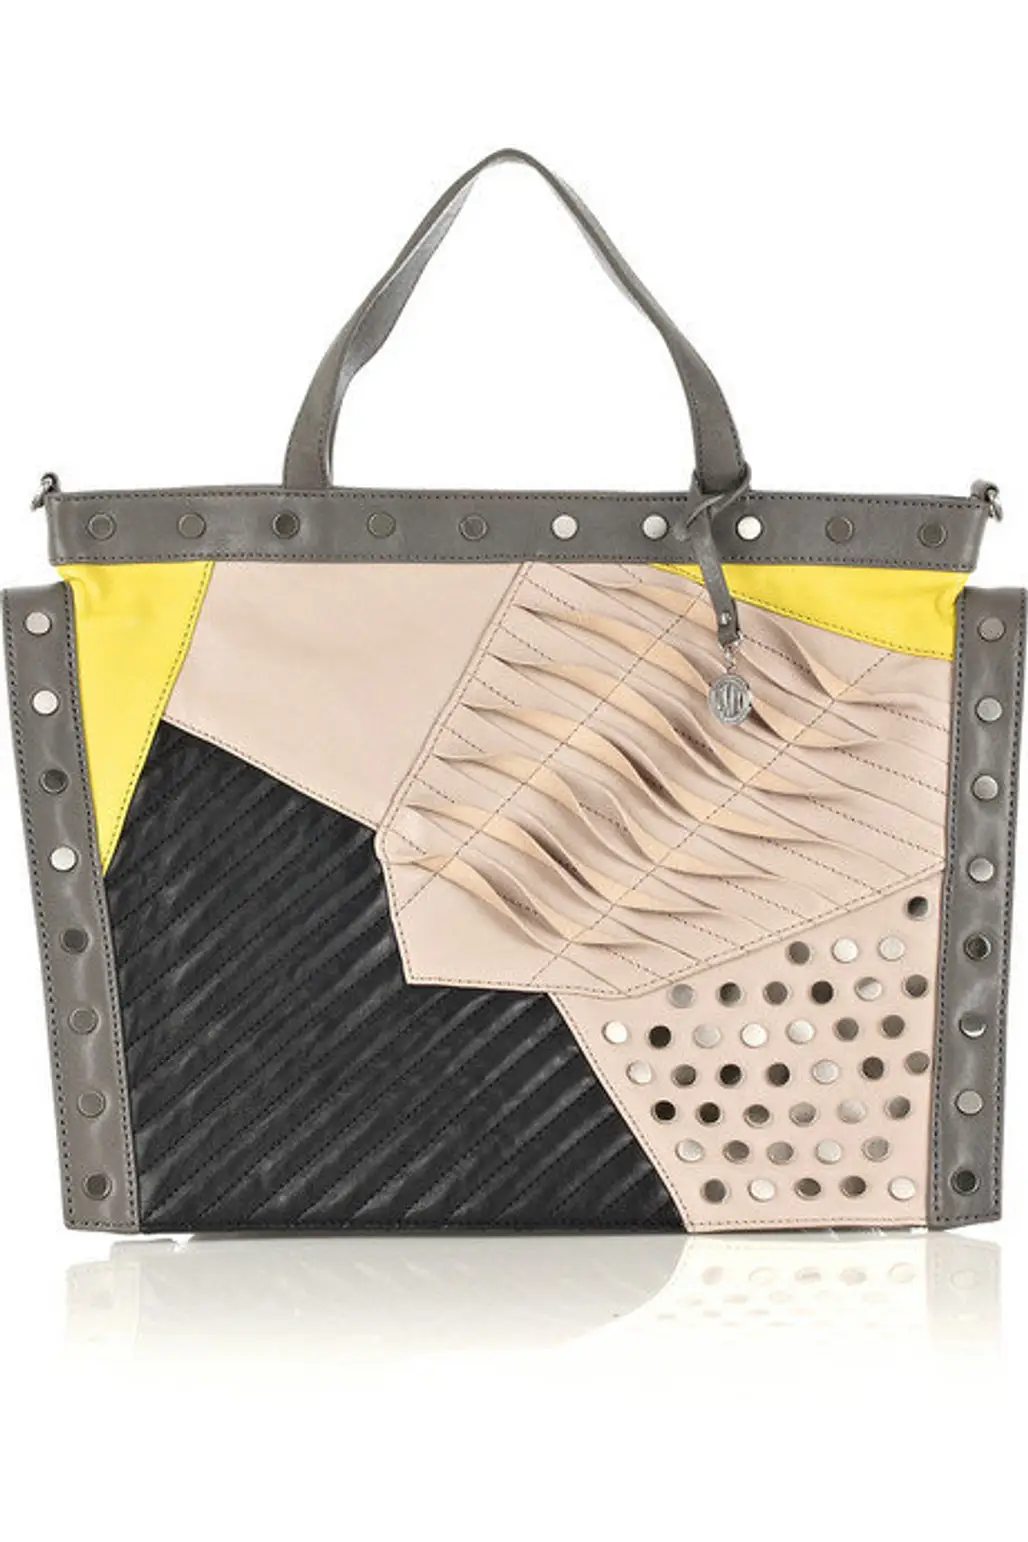 DKNY Abstract Paneled Leather Tote